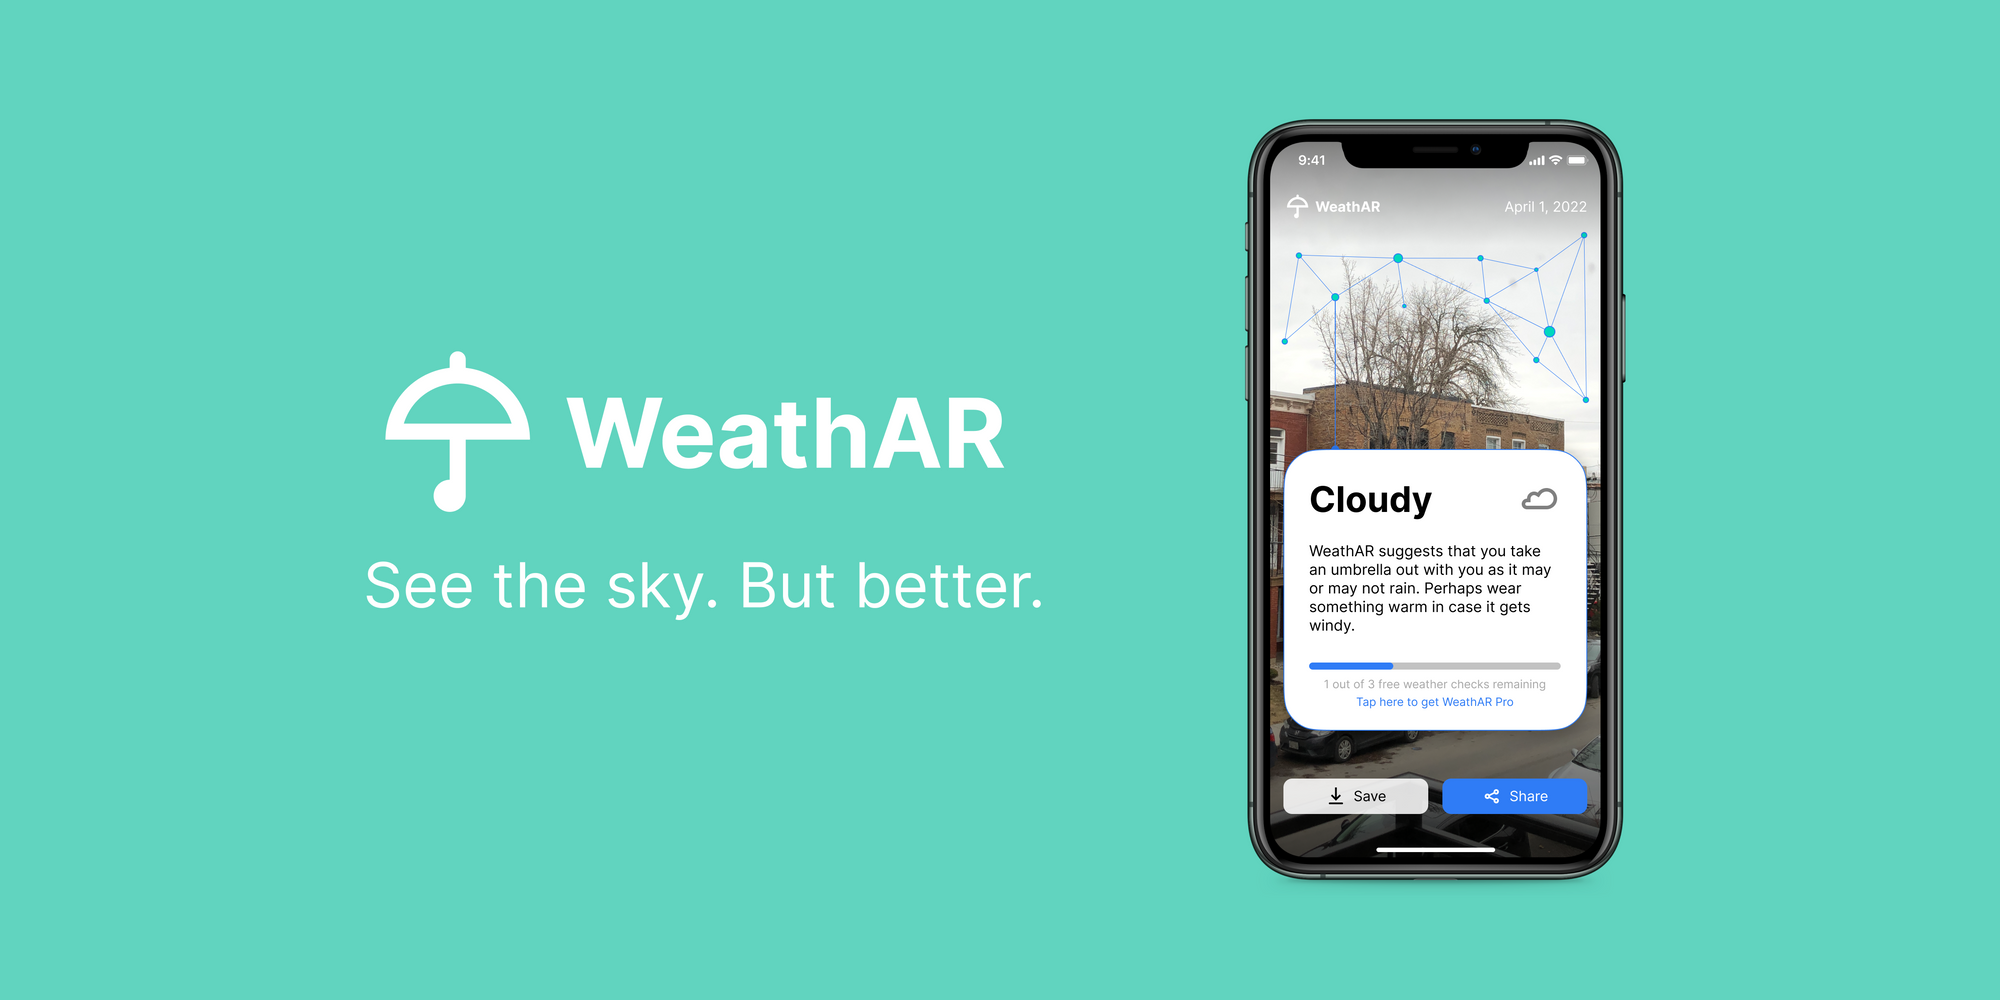 Launching a weather revolution